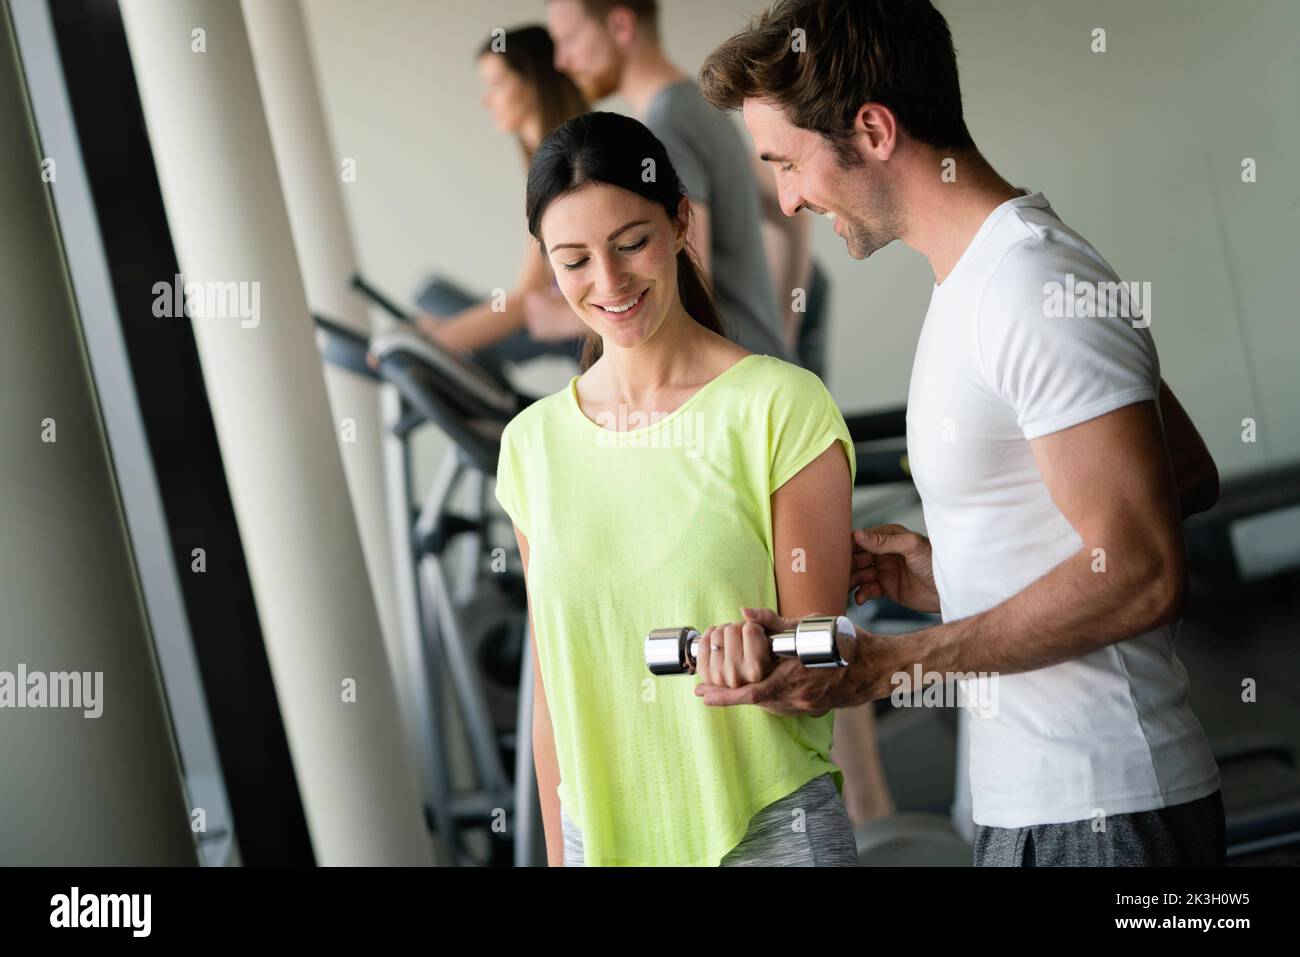 Man trainer flirting with beautiful young woman while helping her at gym Stock Photo